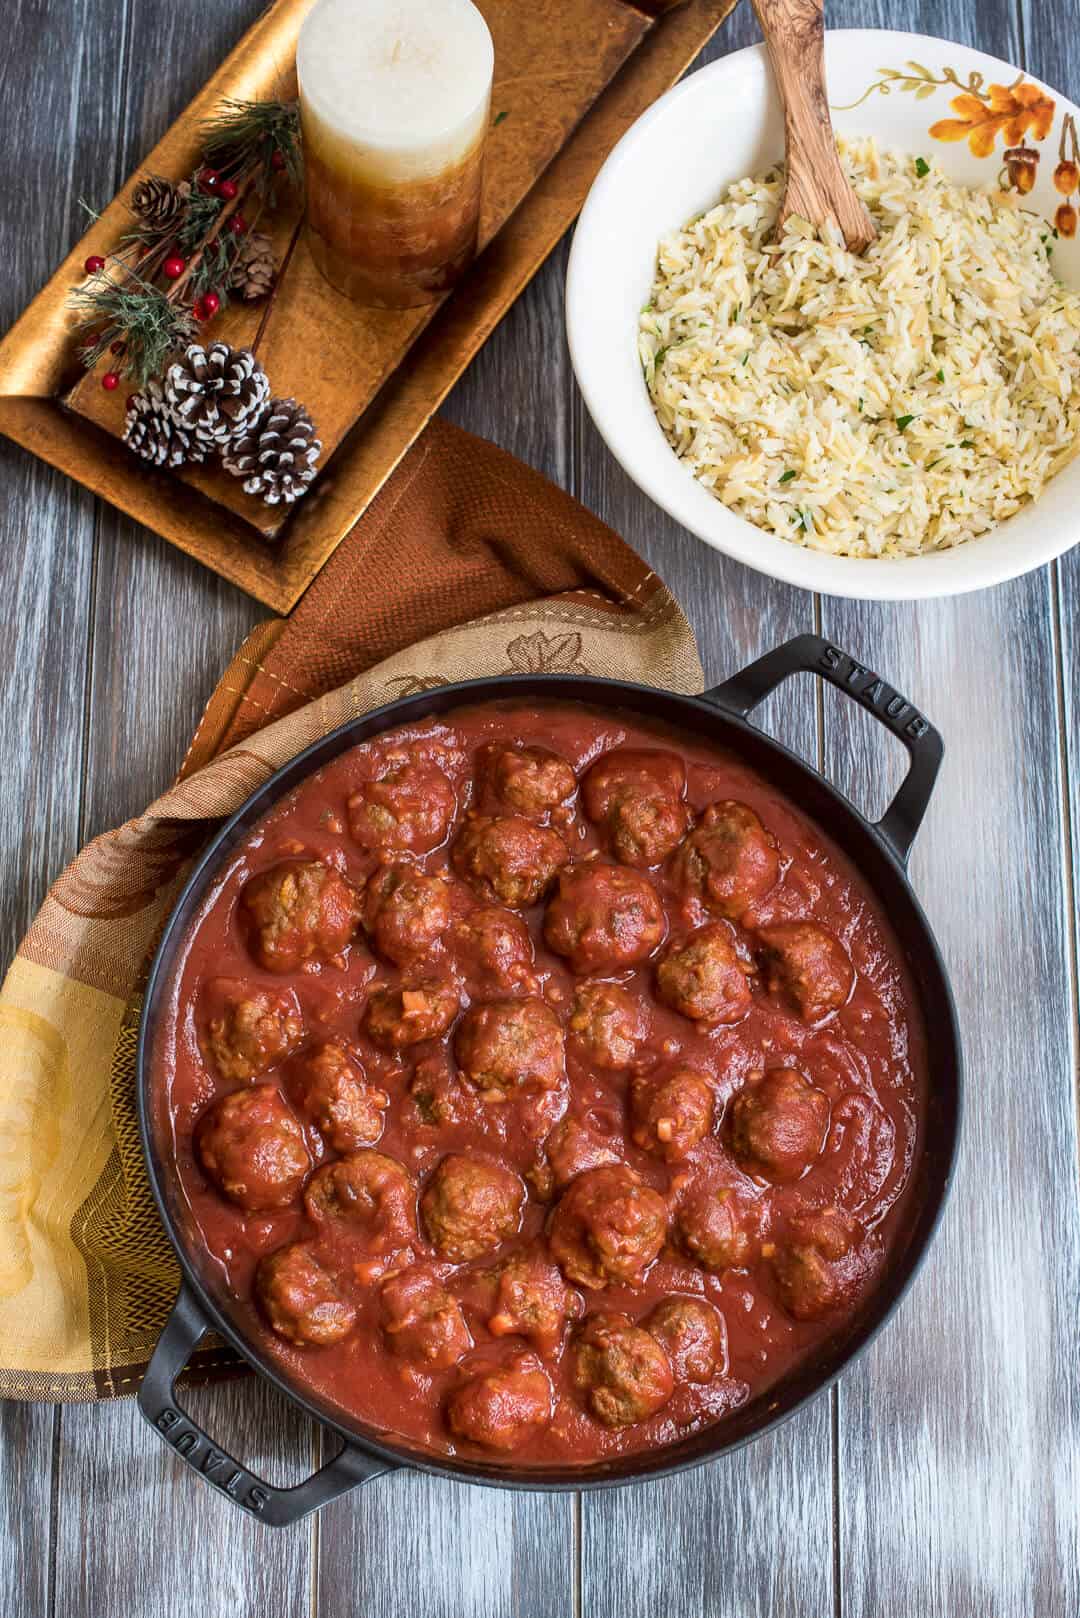 An over the top shot of meatballs in sauce in a cast iron skillet with a bowl of rice pilaf, a candle, and some pine cones in the background.